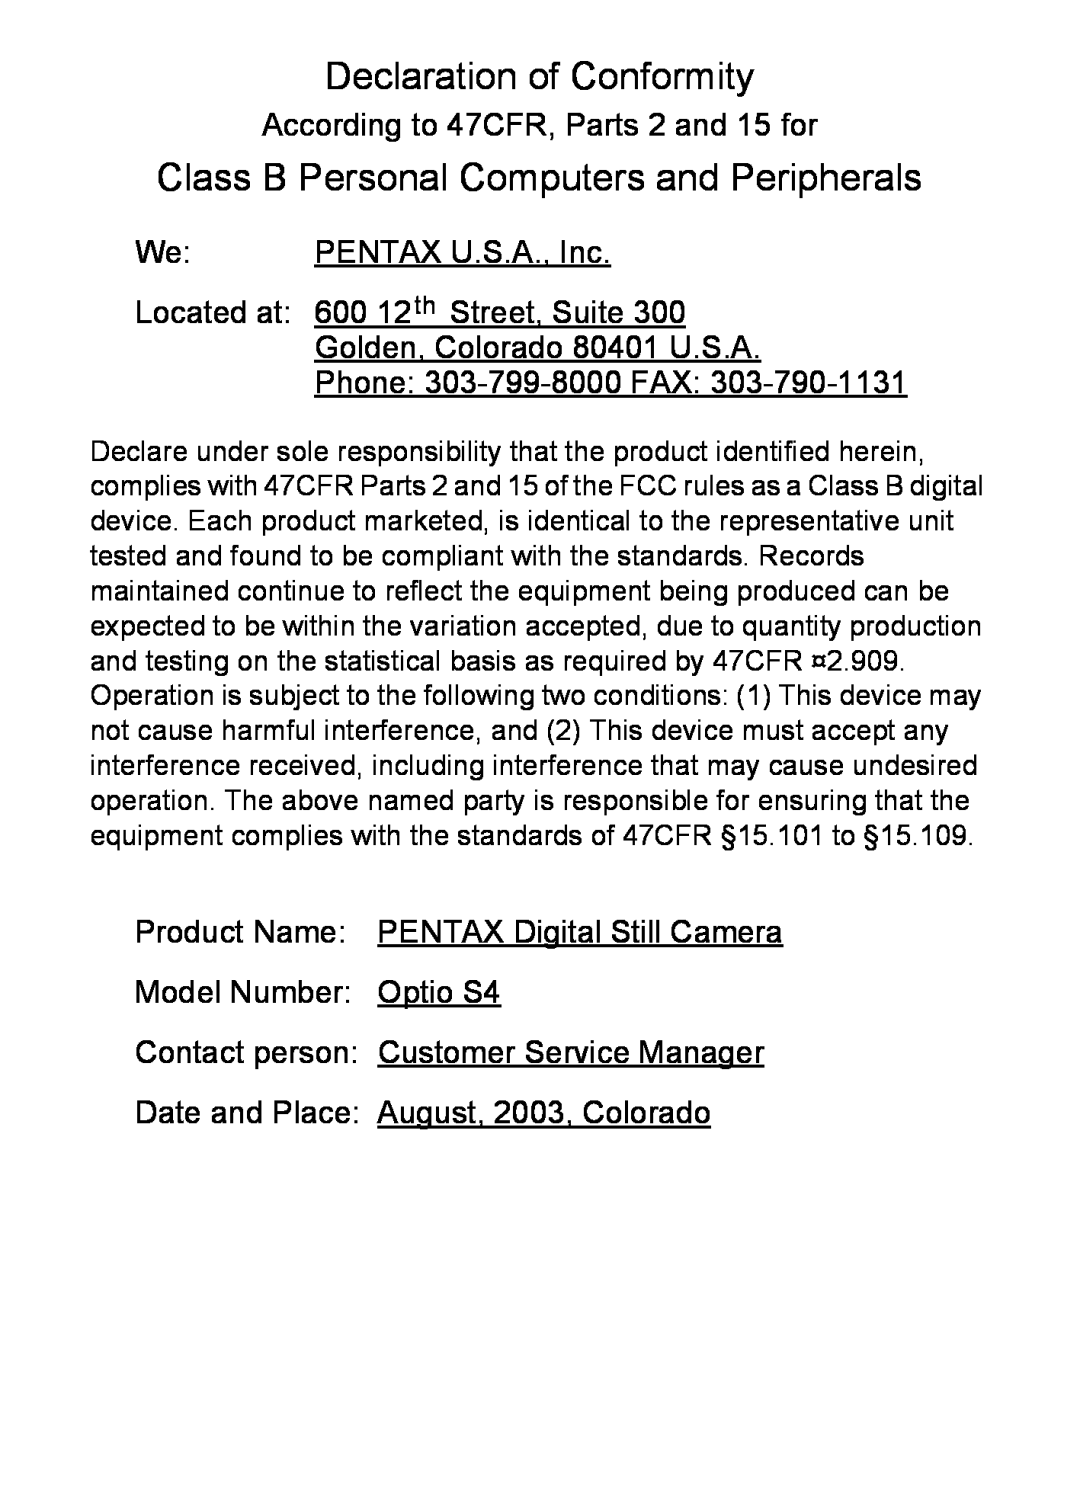 Pentax S4 According to 47CFR, Parts 2 and 15 for, PENTAX U.S.A., Inc, Phone 303-799-8000 FAX, Declaration of Conformity 